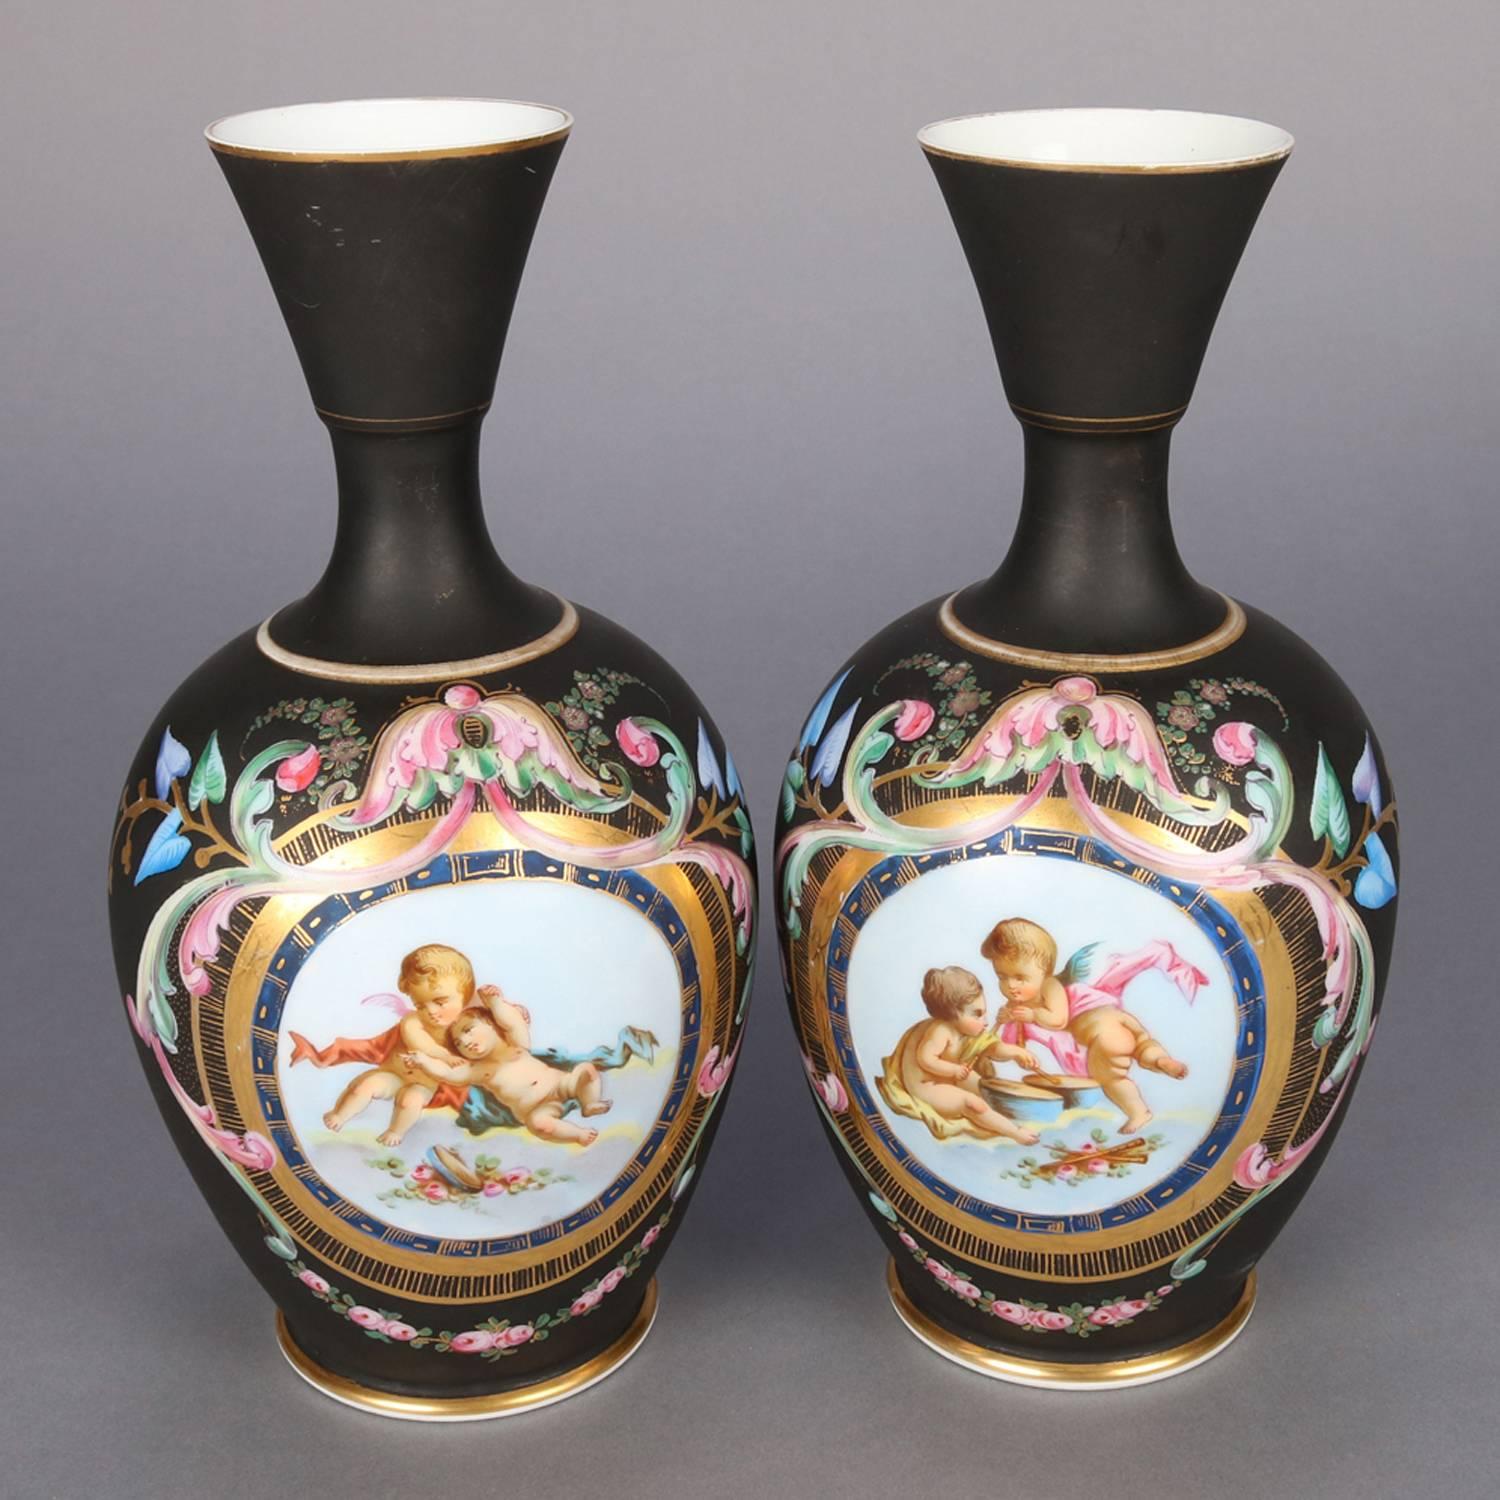 Two Antique French Classical Hand-Painted and Gilt Old Paris Porcelain Vases 2